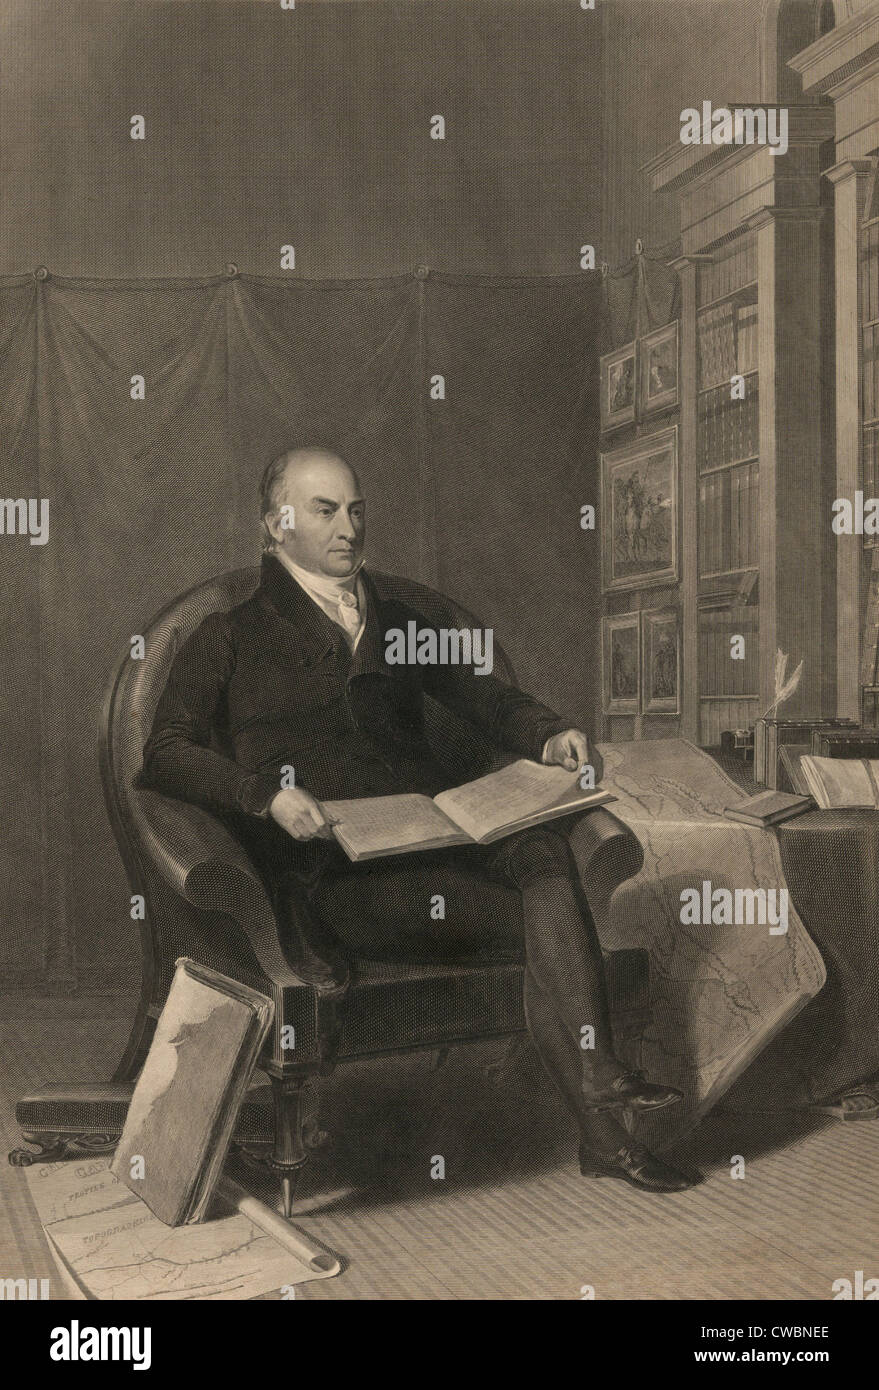 John Quincy Adams (1767-1848), President of the United States from 1825-1829. His American System used high tariffs to support Stock Photo